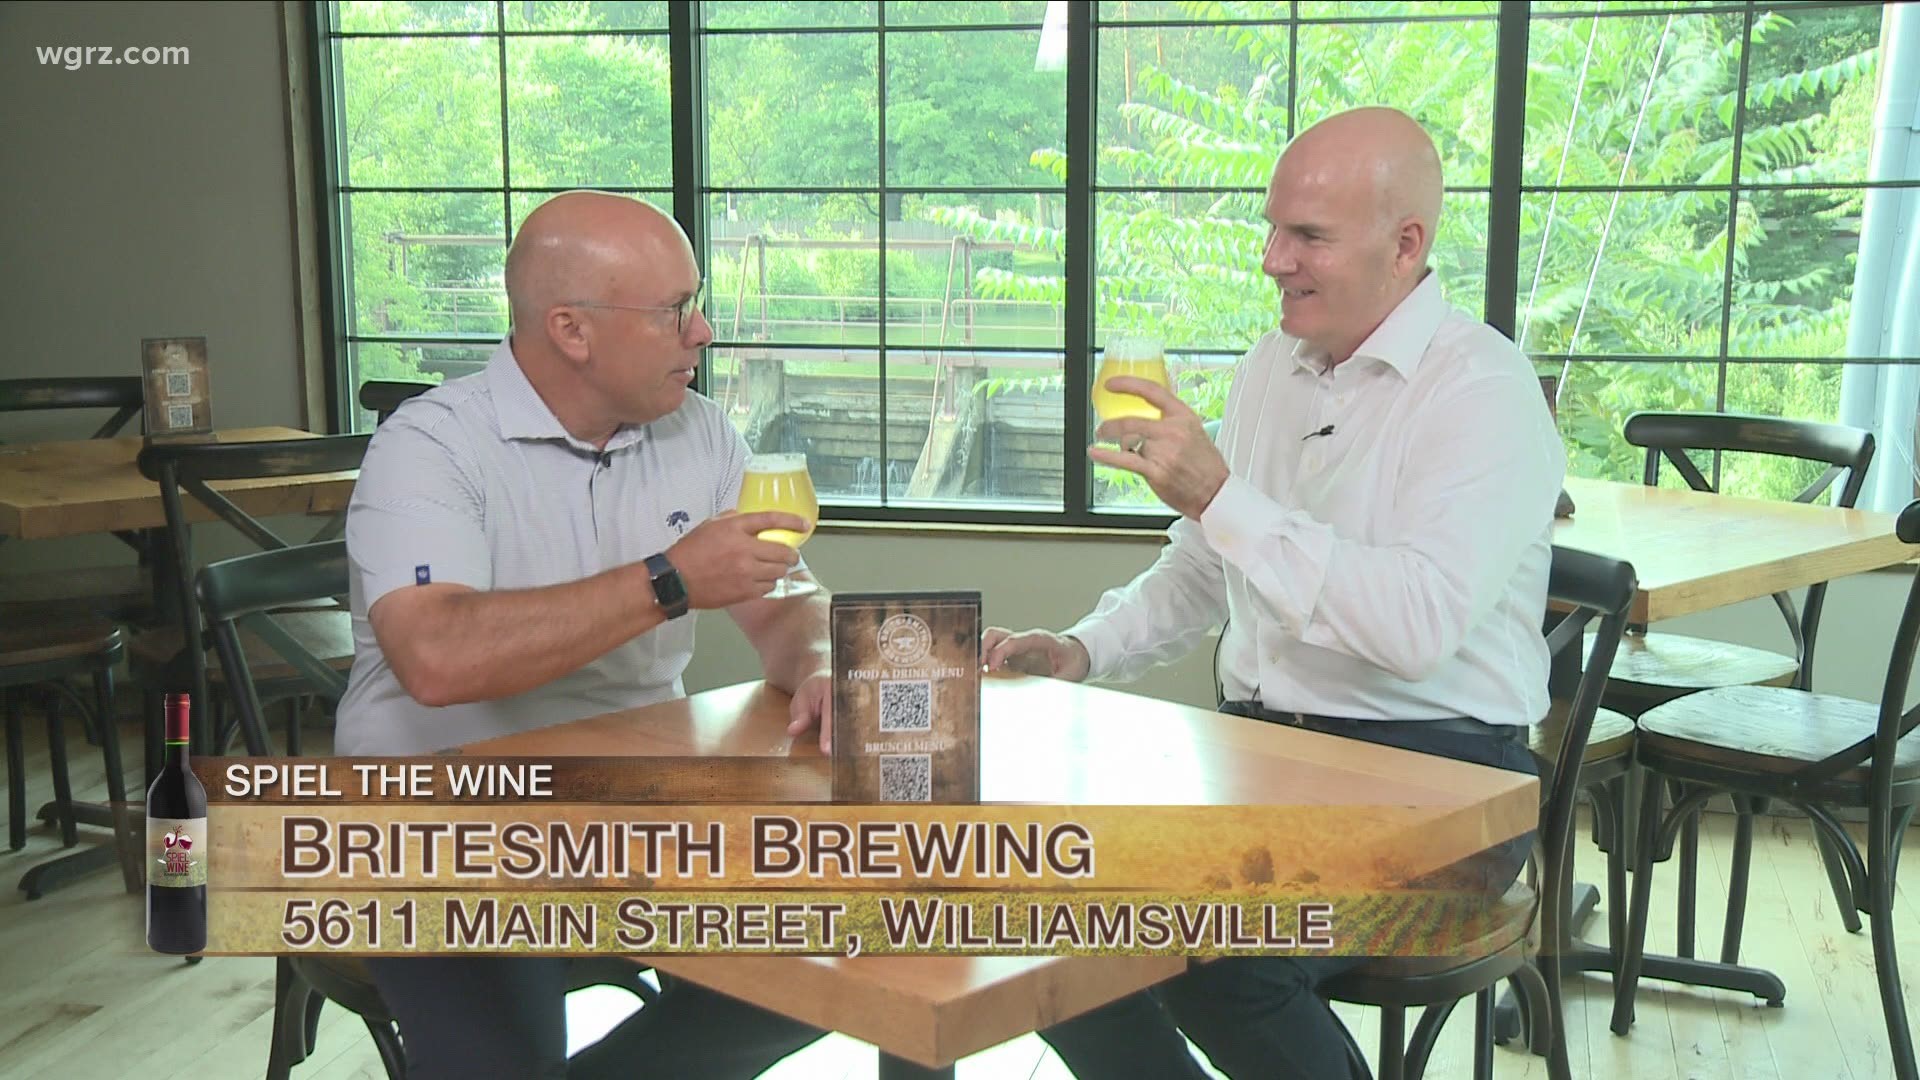 Spiel The Wine - July 10 - Segment 2 (THIS VIDEO IS SPONSORED BY BRITESMITH BREWING)